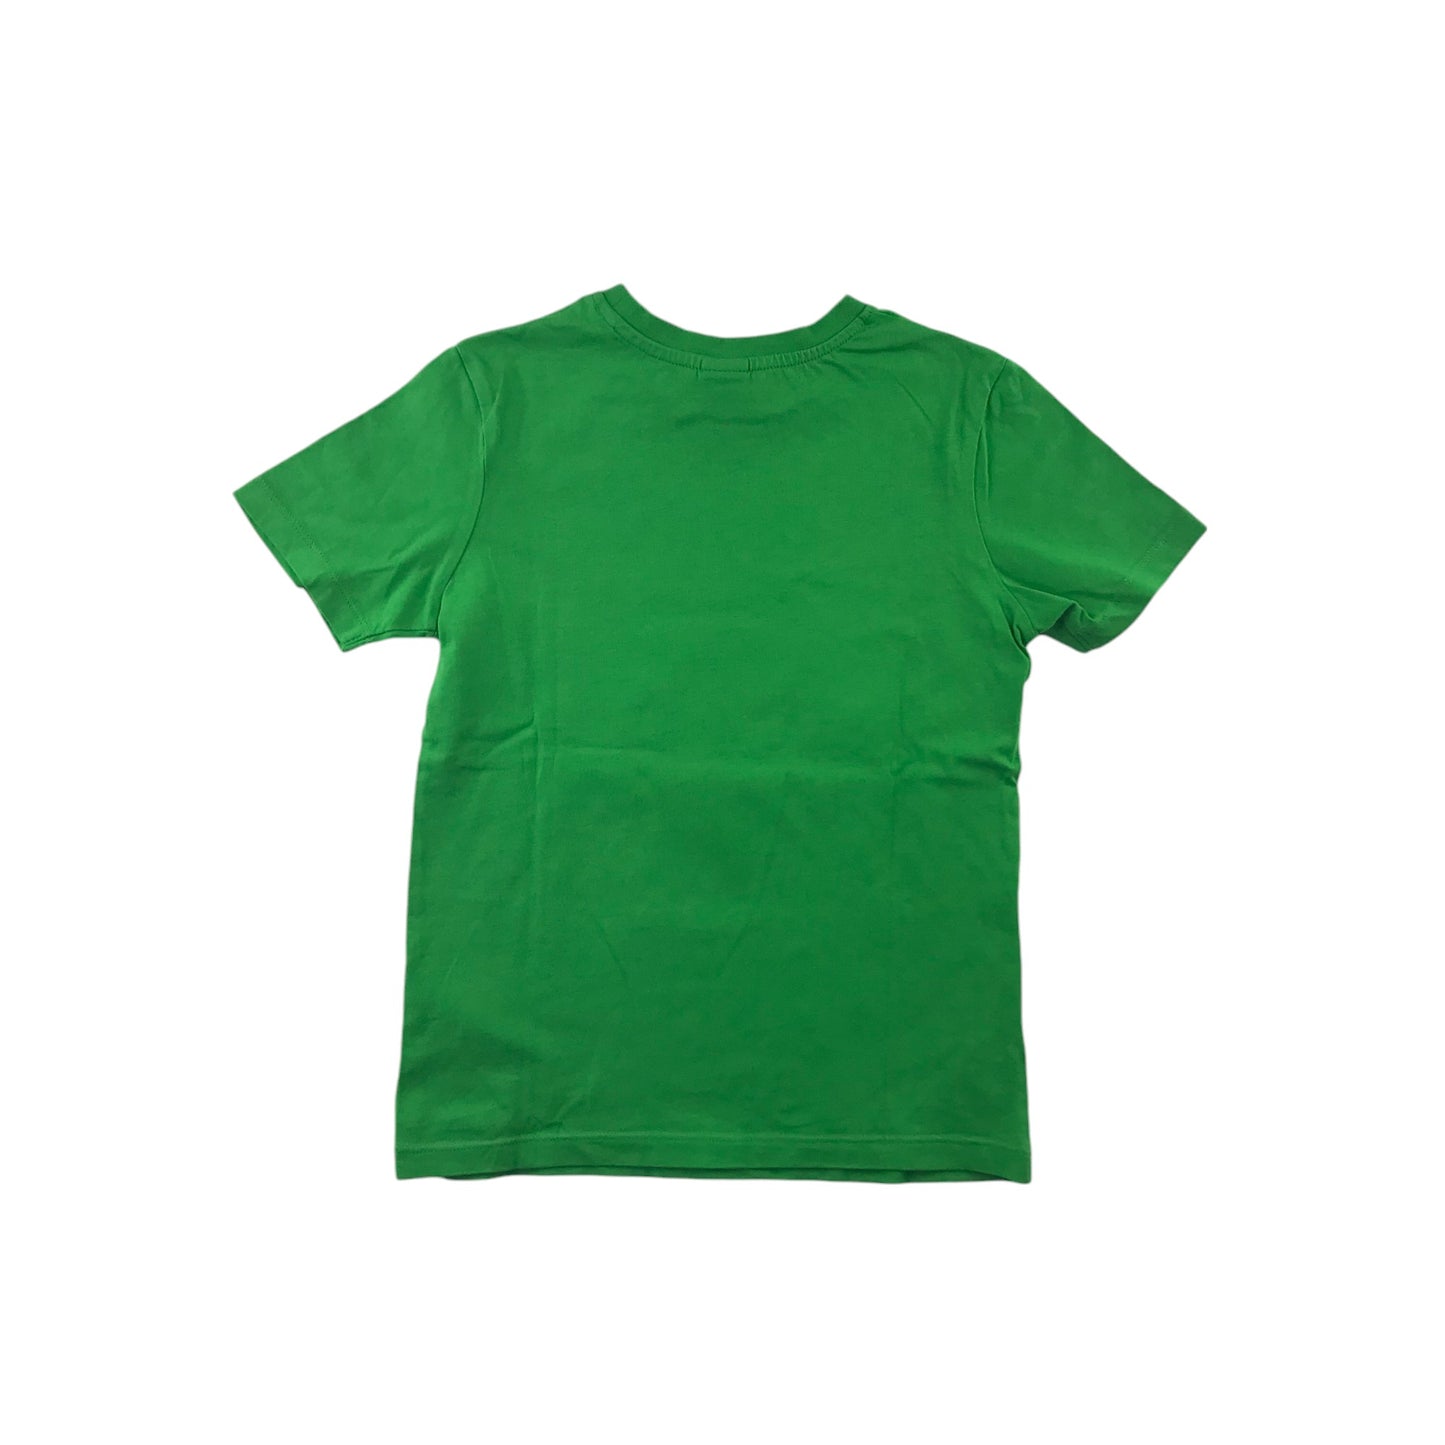 George T-shirt 7-8 years green Minecraft creeper graphic print cotton